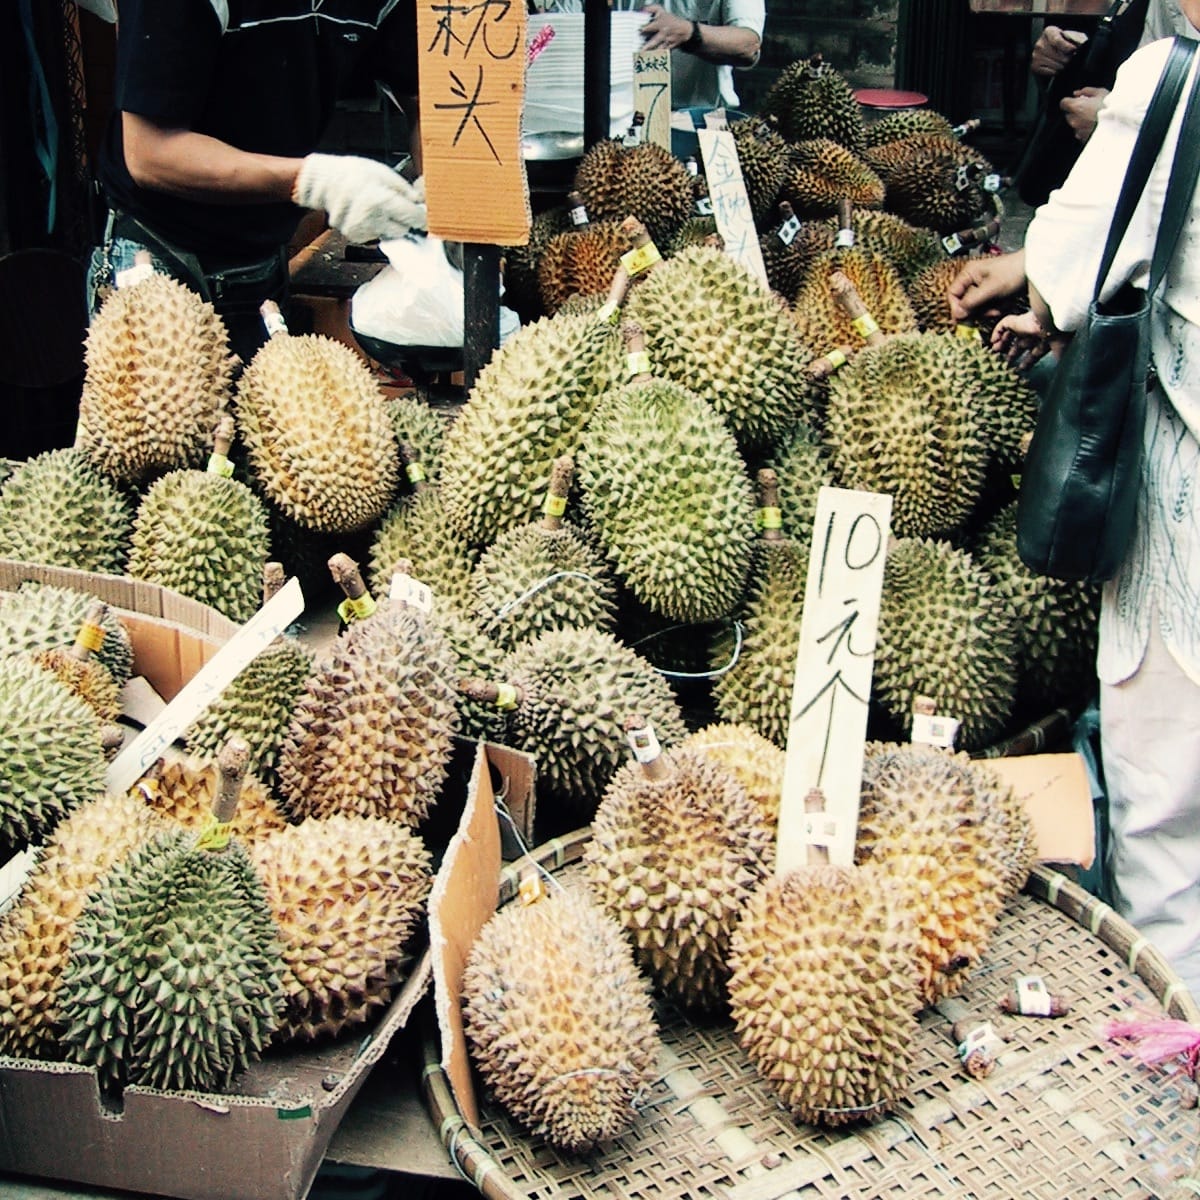 Durian on sale